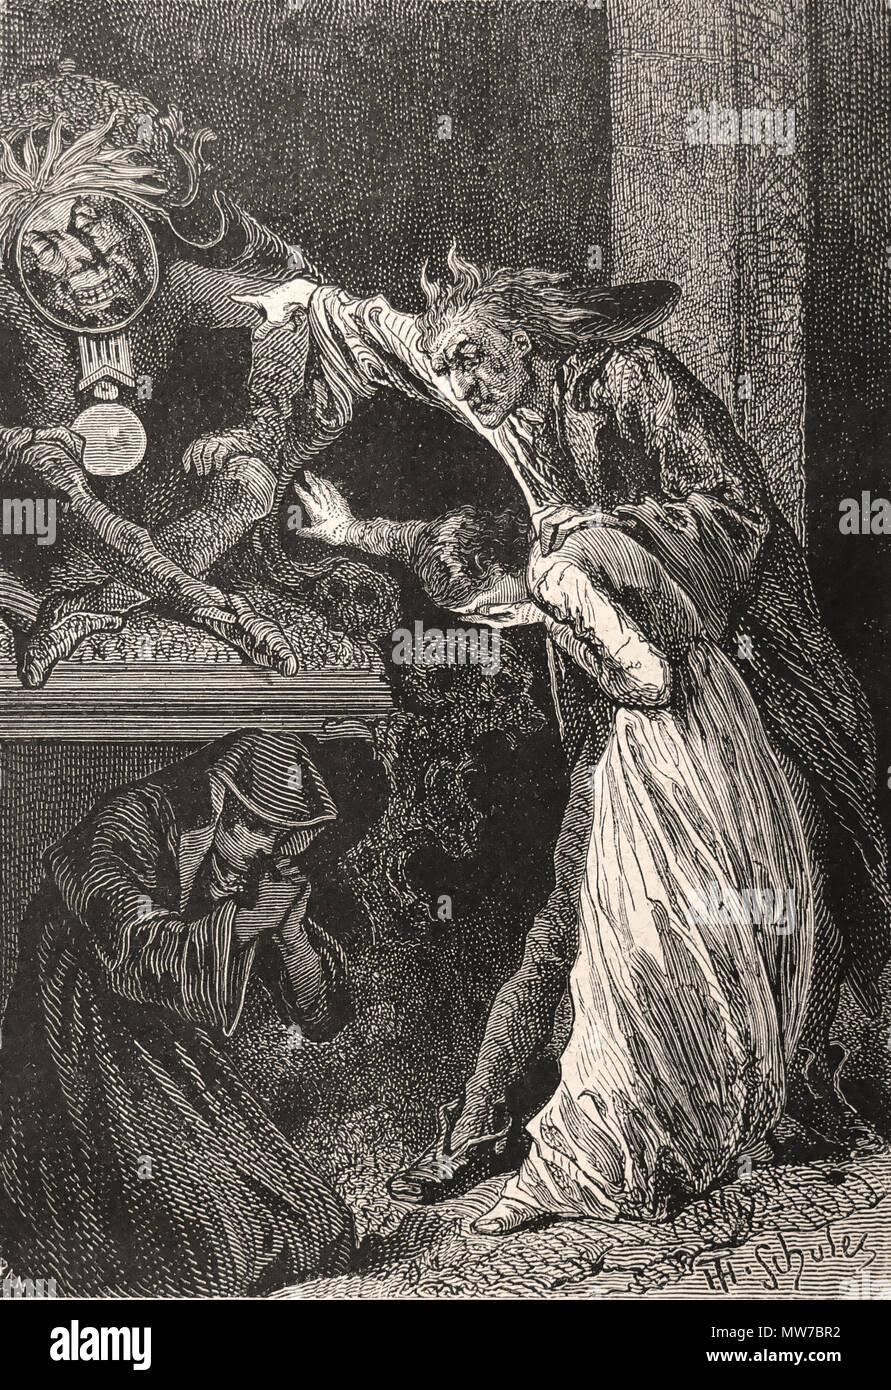 'Behold the man! It's time' Art by Théophile Schuler from 'Le Docteur Ox' by Jules Verne (1874). Stock Photo